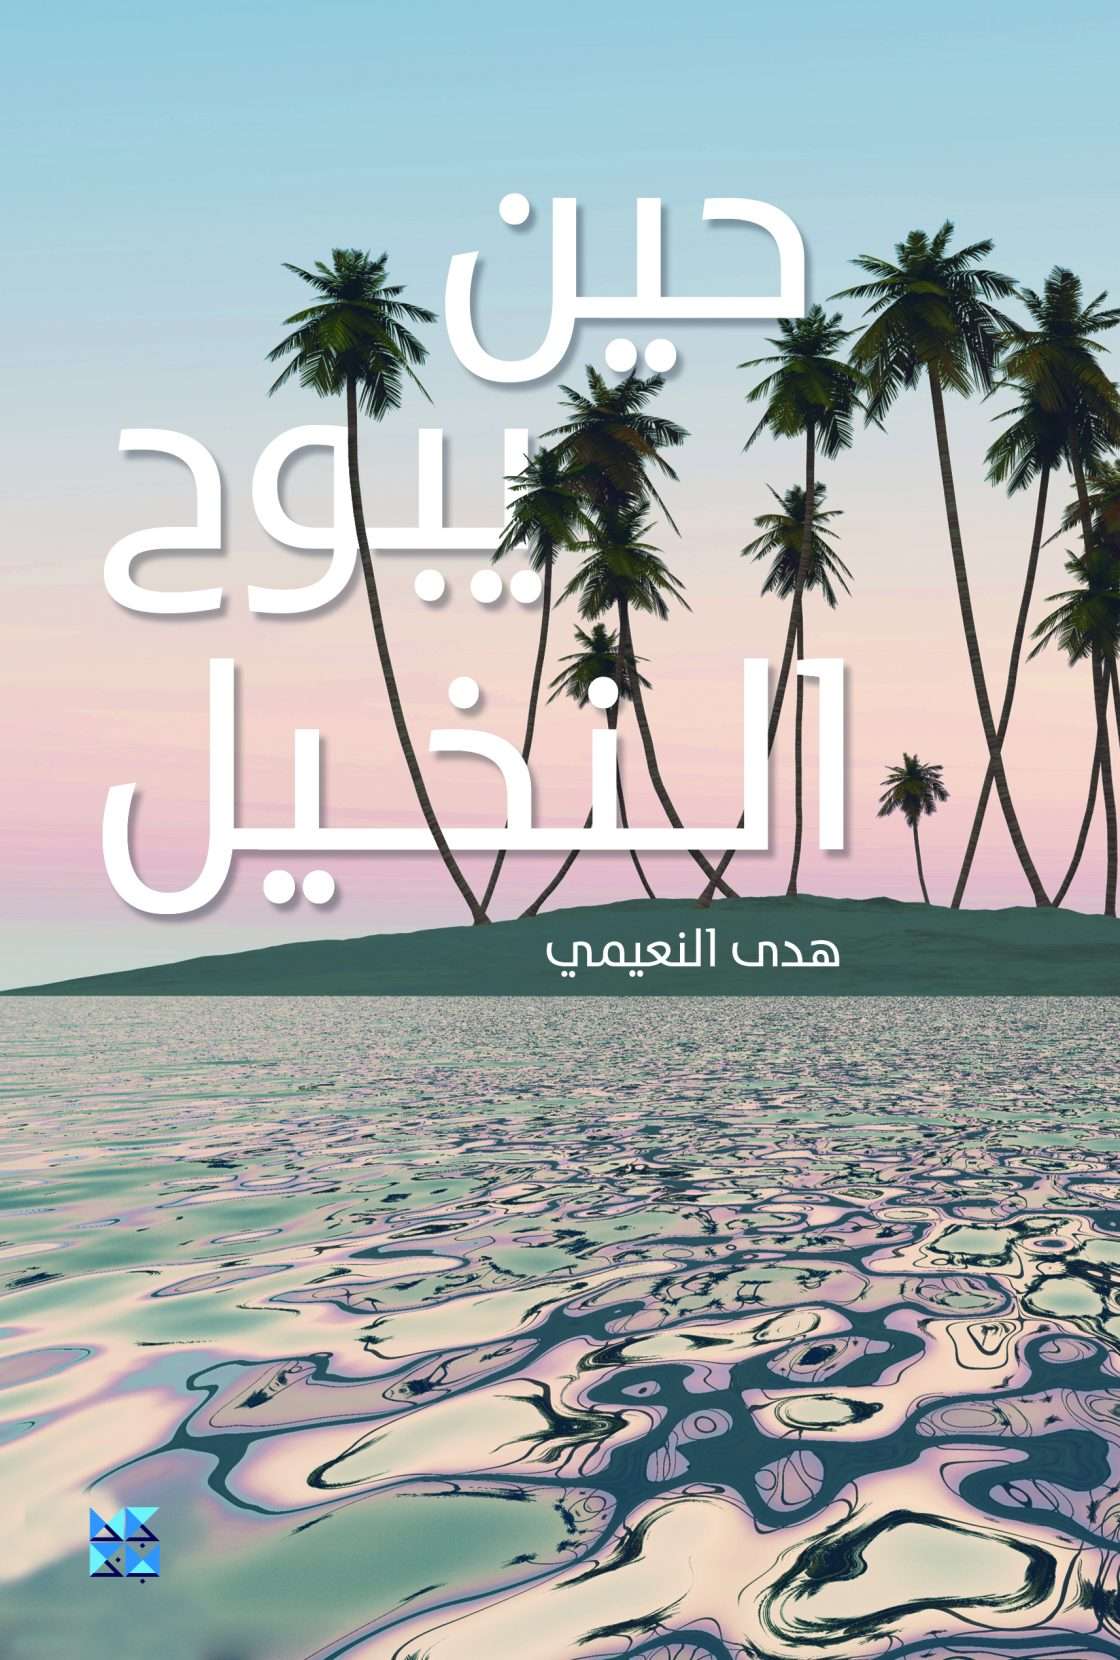 When Palms are Revealed – Arabic